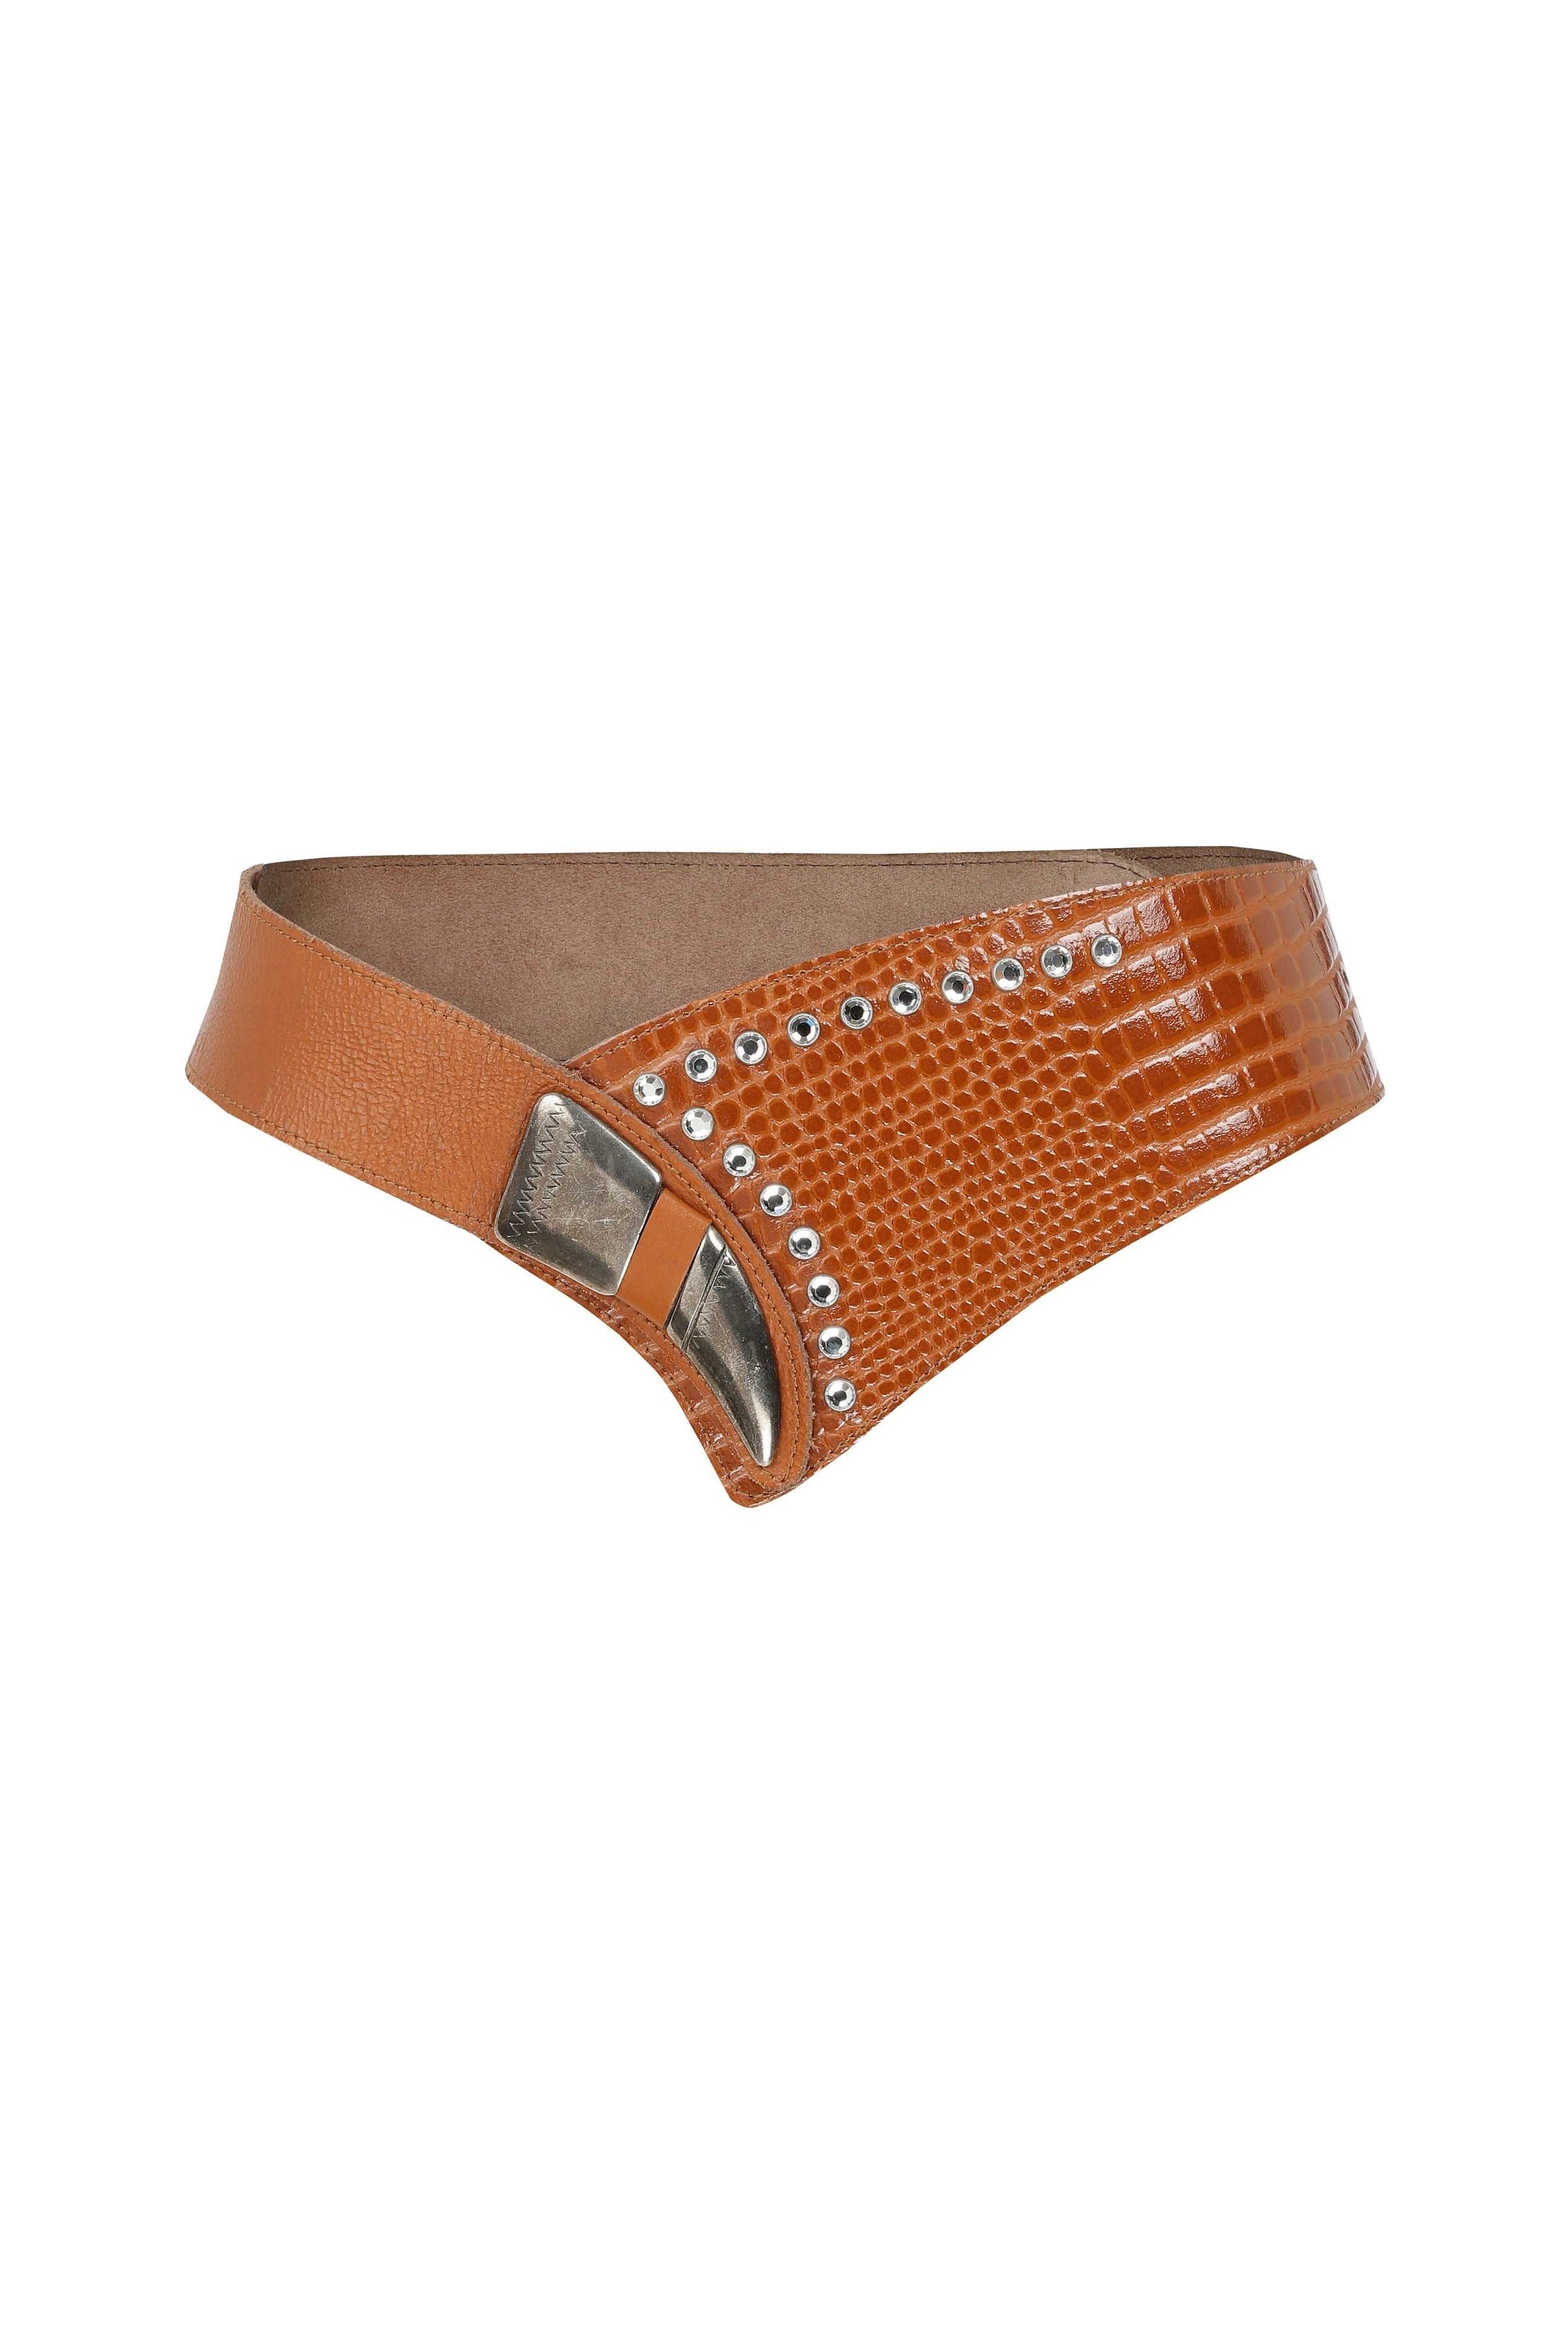 Brown Leather Belt with Silver Accessory